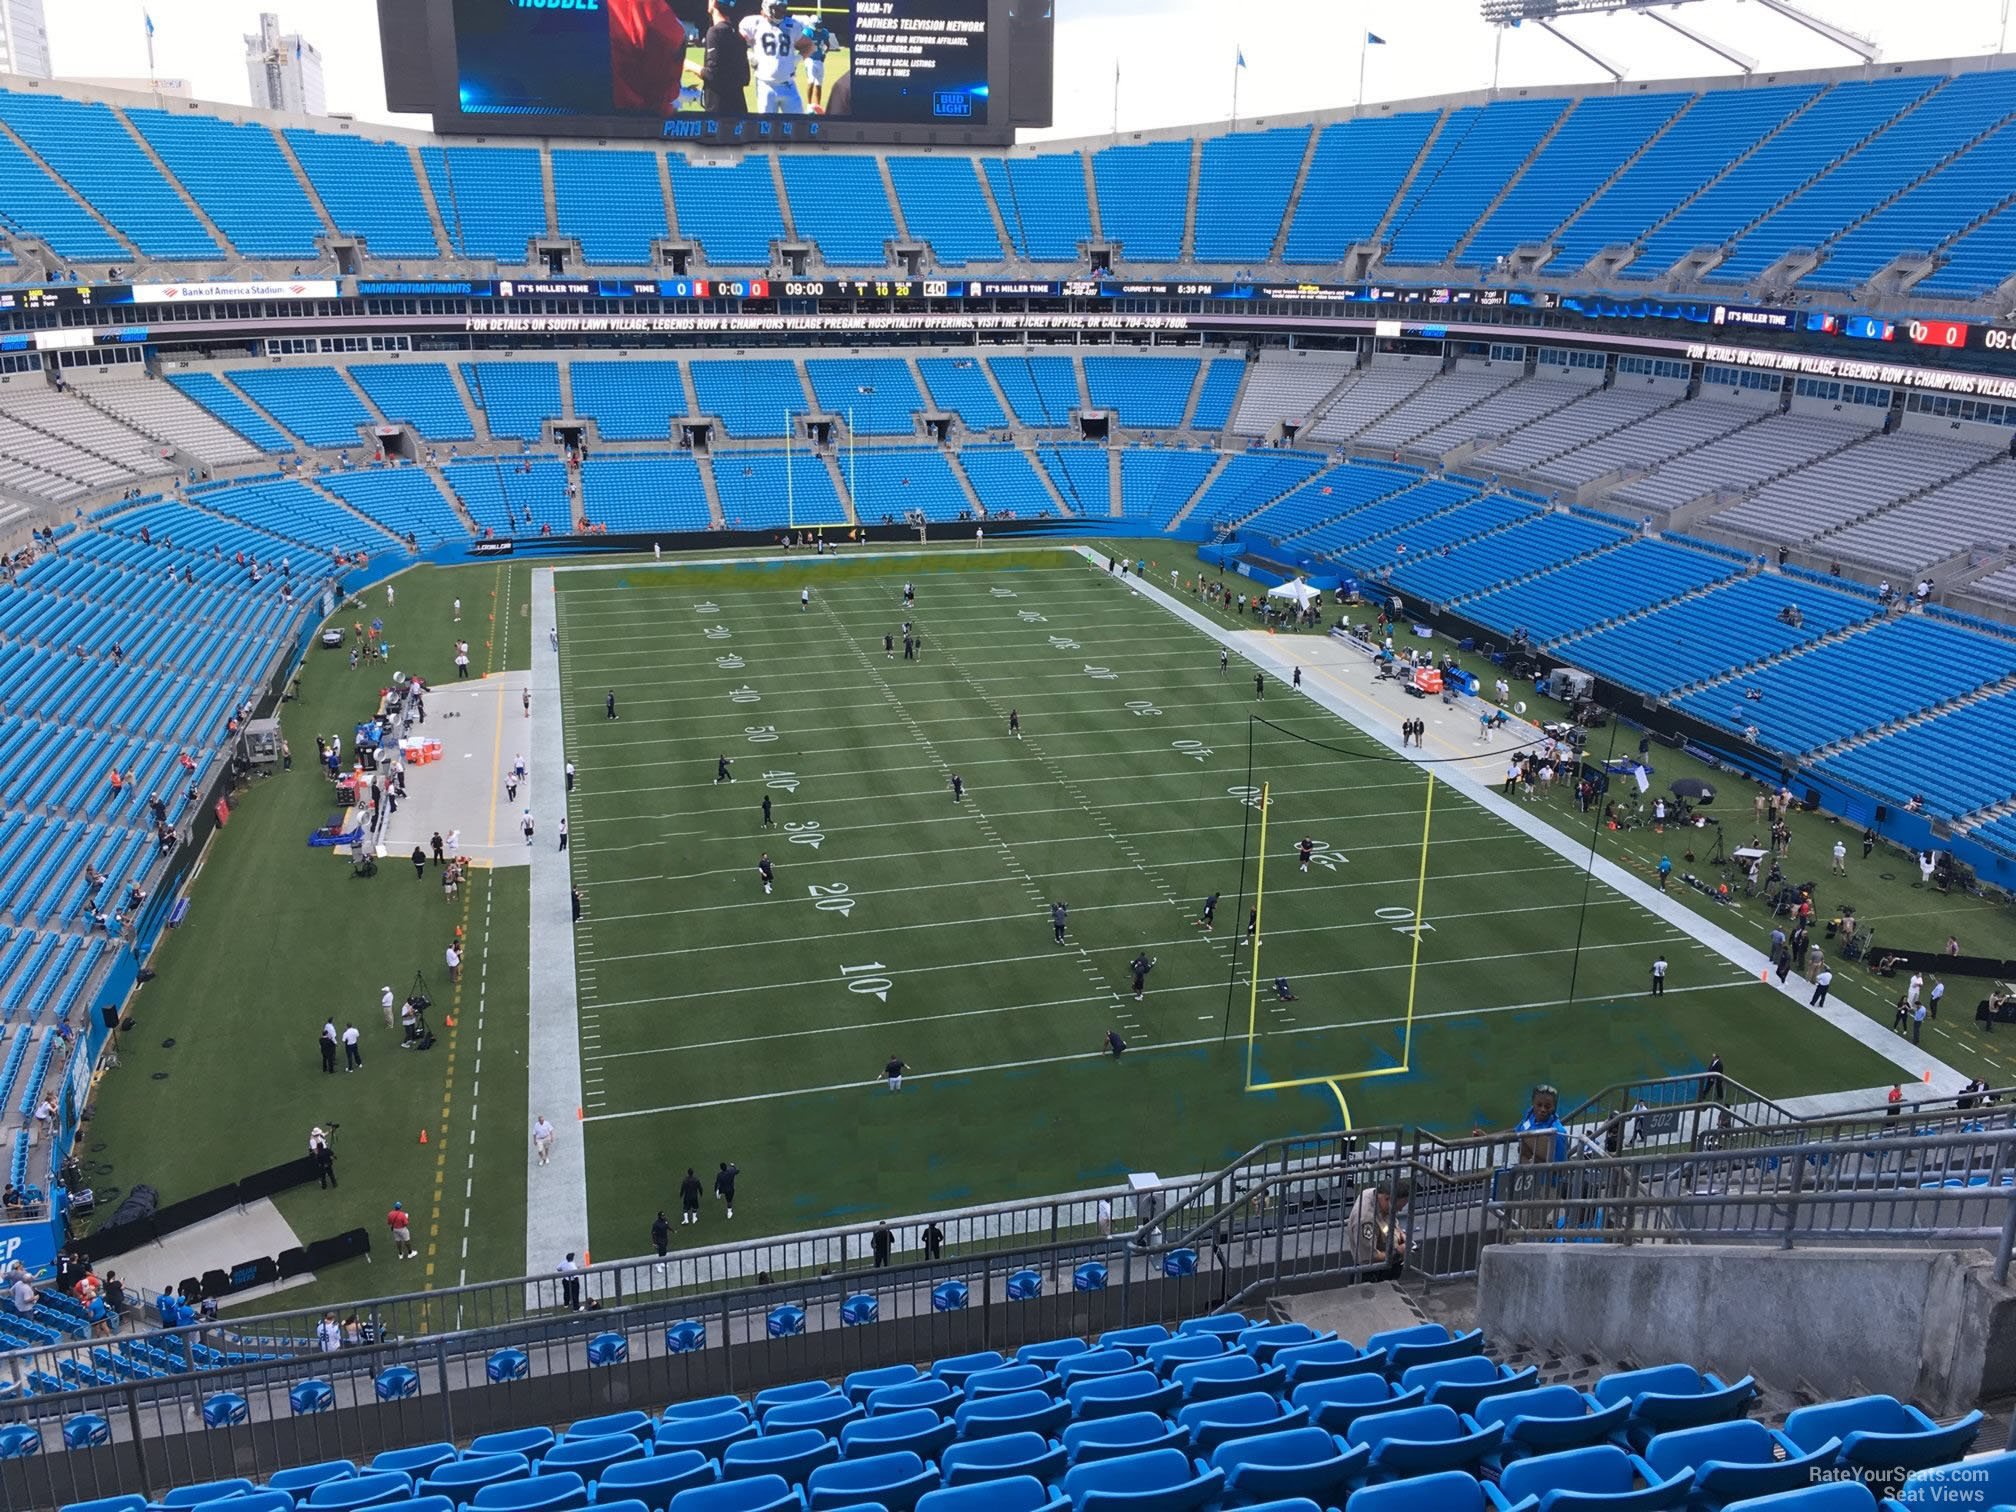 section 503, row 9 seat view  for football - bank of america stadium